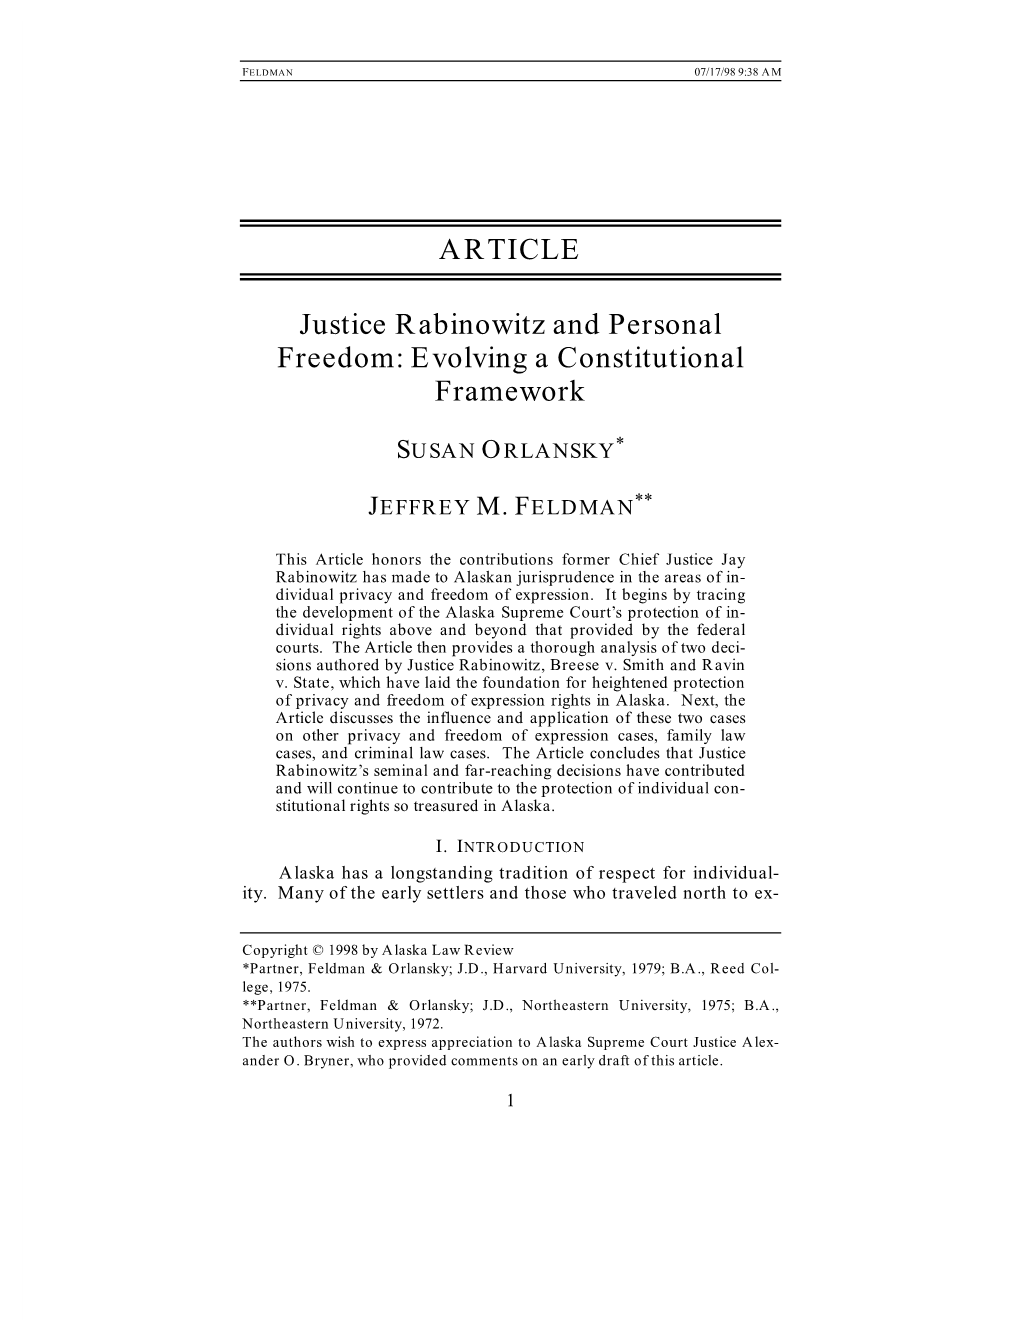 ARTICLE Justice Rabinowitz and Personal Freedom